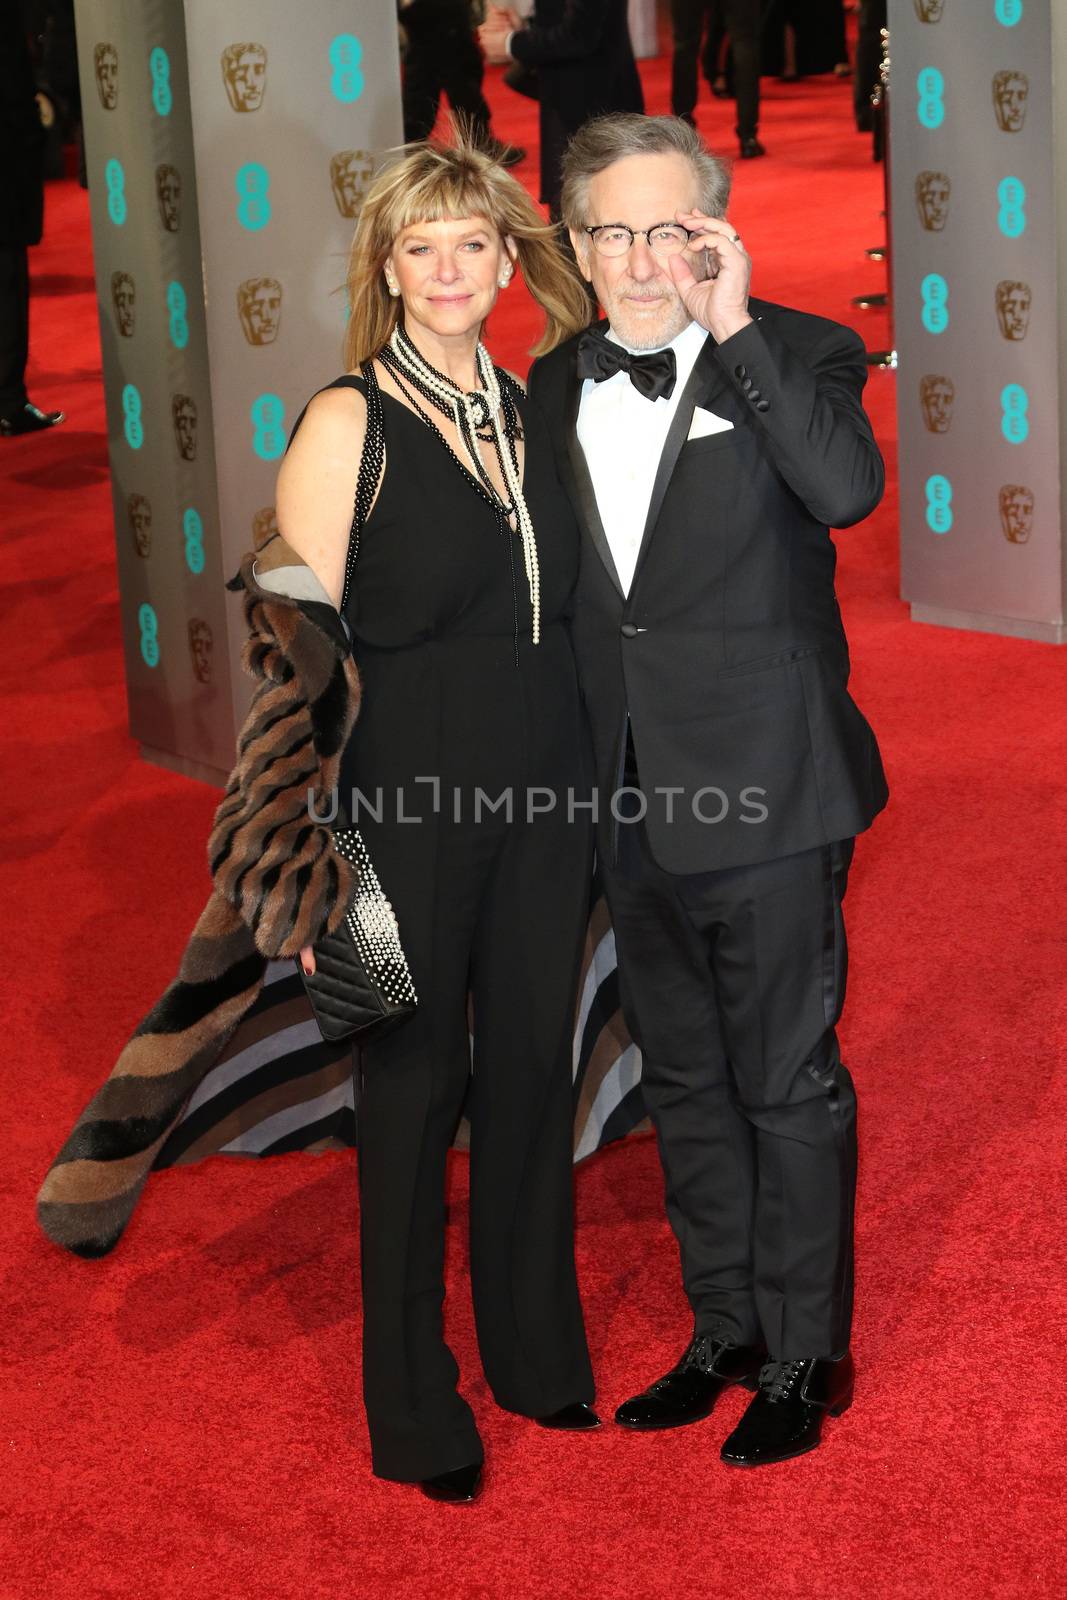 UK, London: American director Steven Spielberg poses with wife Kate Capshaw on the red Carpet at the EE British Academy Film Awards, BAFTA Awards, at the Royal Opera House in London, England, on 14 February 2016.